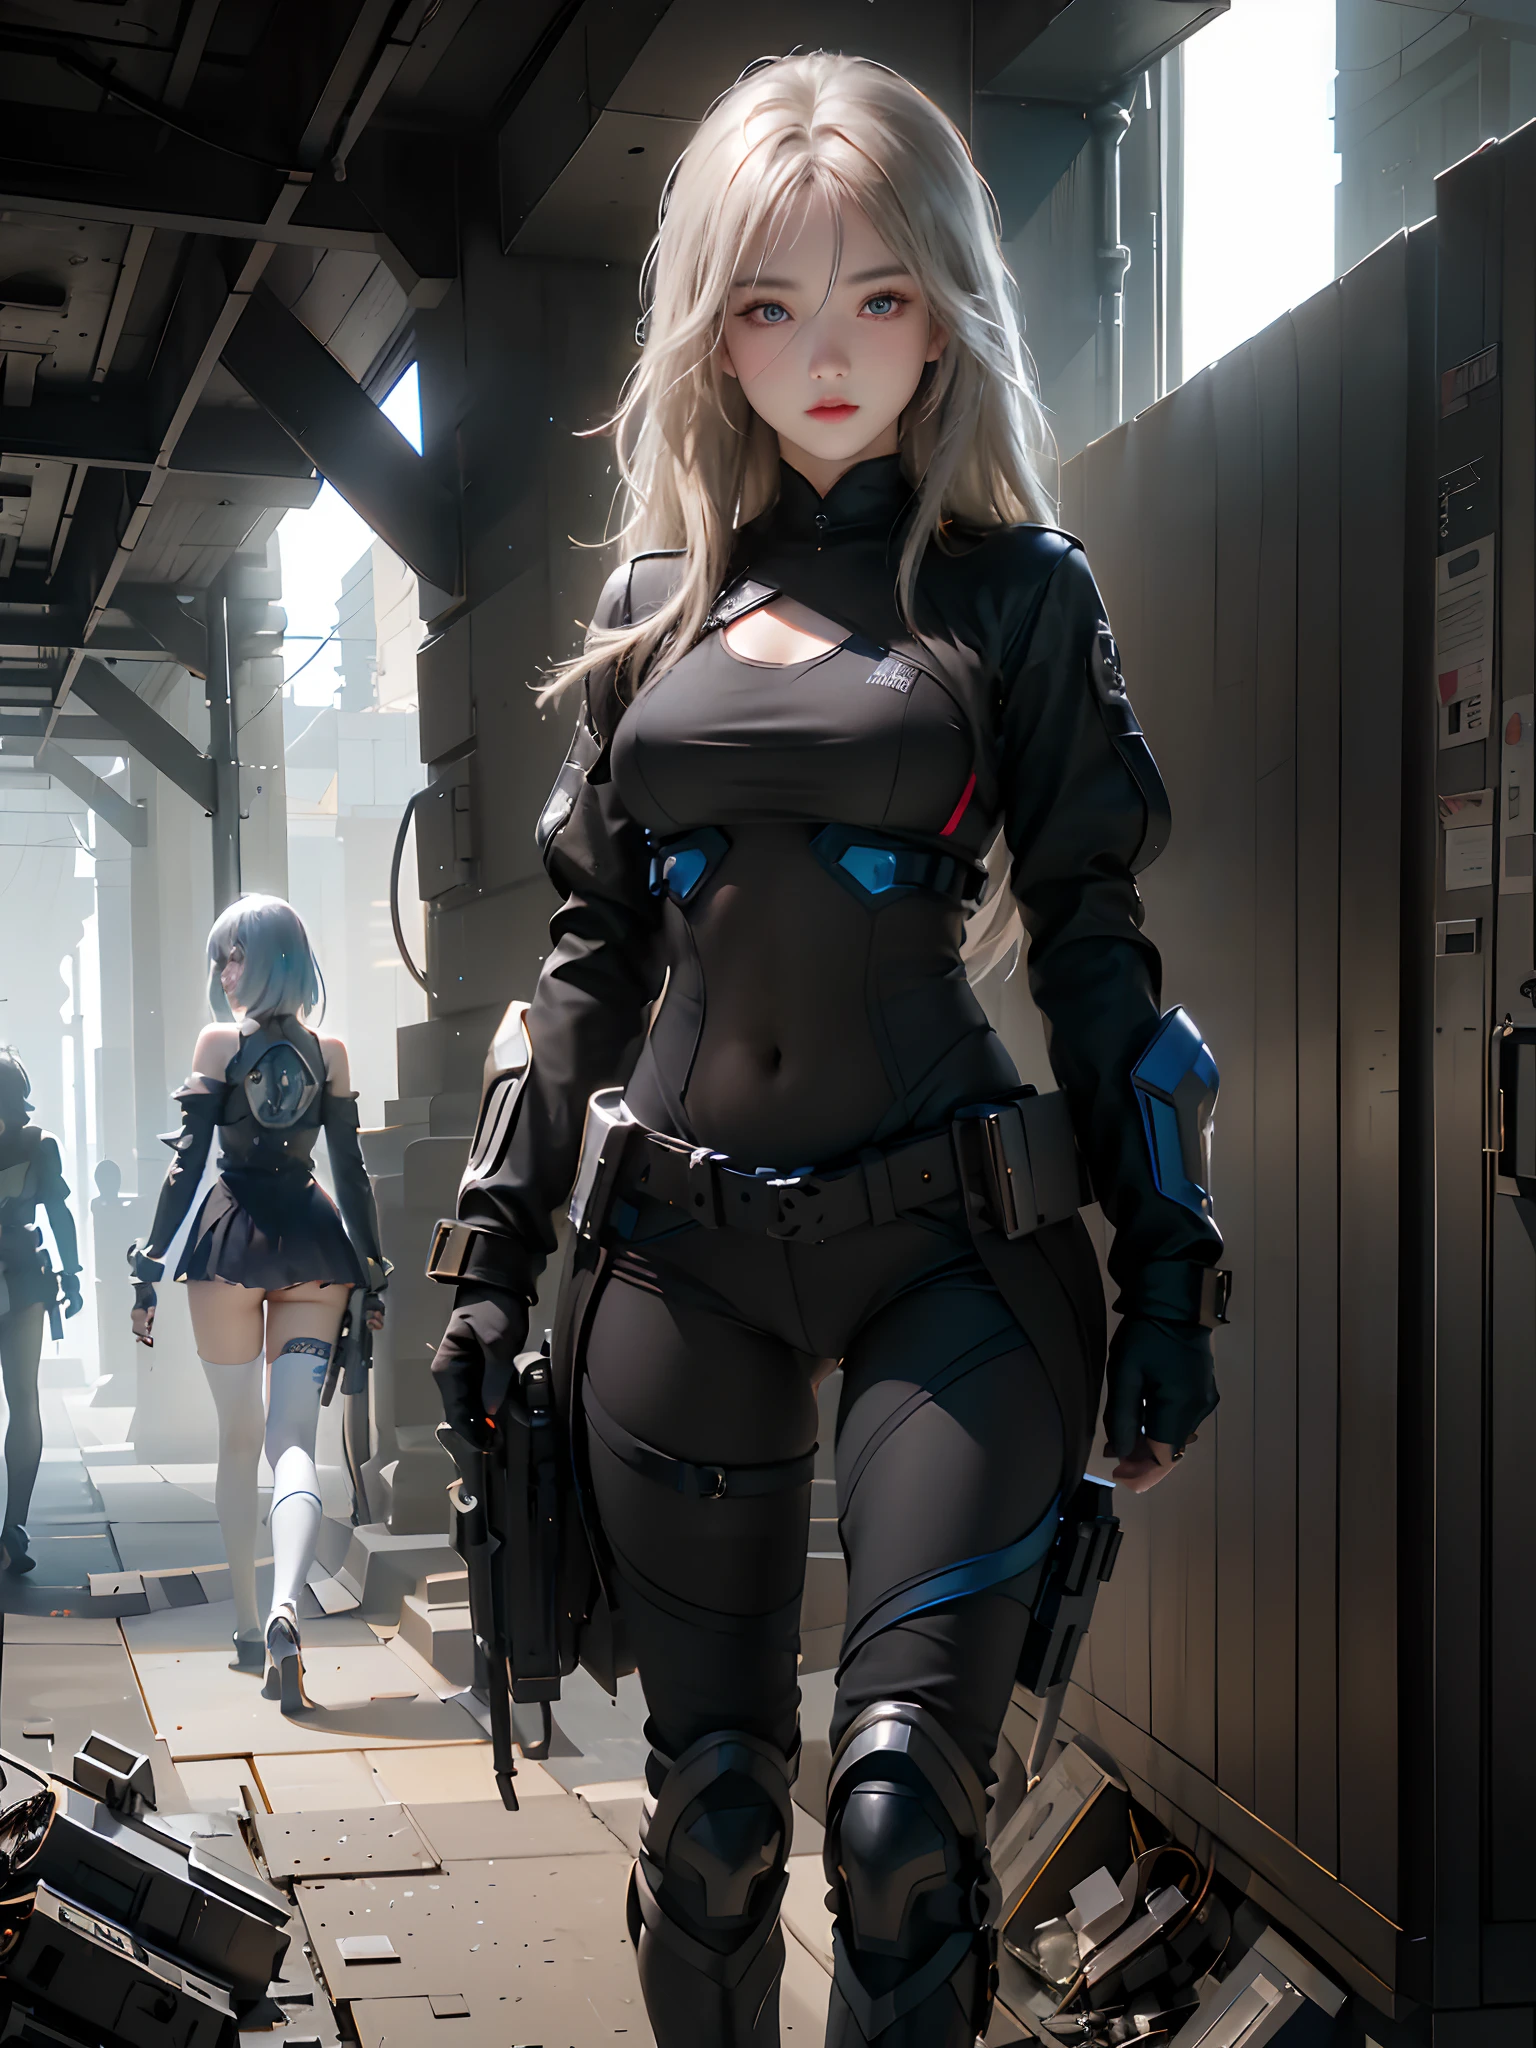 ((top-quality)), (((​masterpiece)), (detaileds: 1.4), 3D, Beautiful Cyberpunk Woman Image, bob cuts, Broken black tights, leather clothes, Electromechanical, nffsw(HighDynamicRange), Ray traching, NVIDIA RTX, Hyper-Resolution, Unreal 5, Sub-surface scattering, PBR Texture, Postprocess, Anisotropy Filtering, depth of fields, Maximum sharpness and acutance, Multilayer Texture, Albedo and Highlight Maps, Surface Coloring, Accurate simulation of light-material interactions, perfectly proportions、octane renderings、two tone lighting、Large aperture、Low ISO、White Balance、thirds rule、8K Raw、​masterpiece、top-quality、(8k extremely detailed CG unit wallpaper)(top-quality)、(The best illustrations)、(Best Shadows), innocent blue eyes, long hair, body swimsuit, poni hair